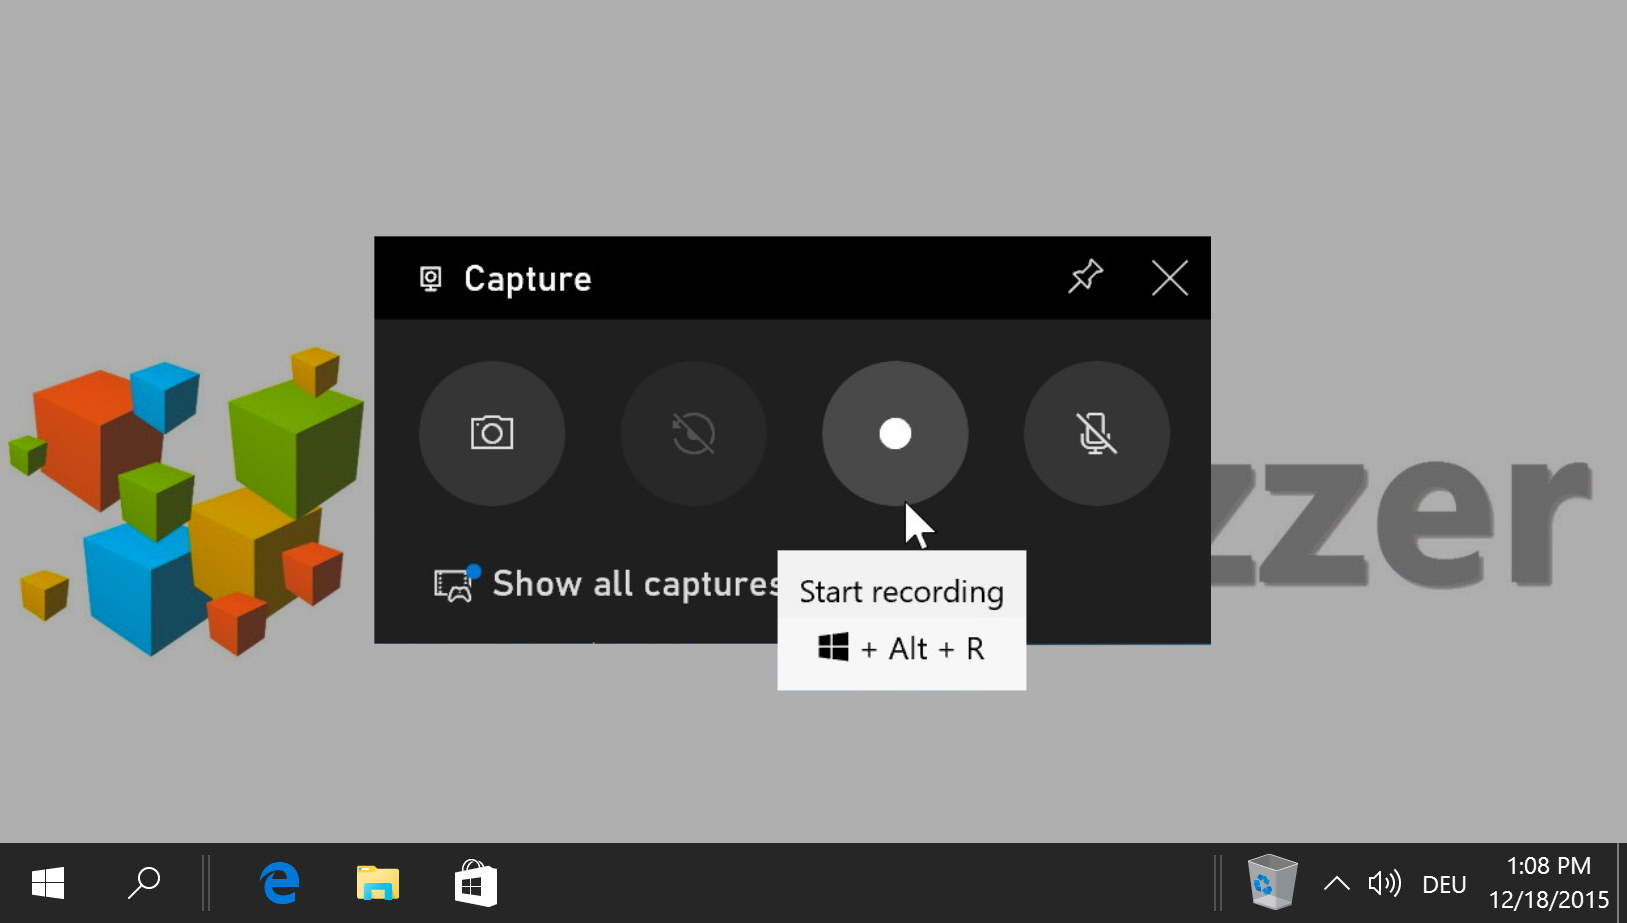 how to record a video of screen on windows 10